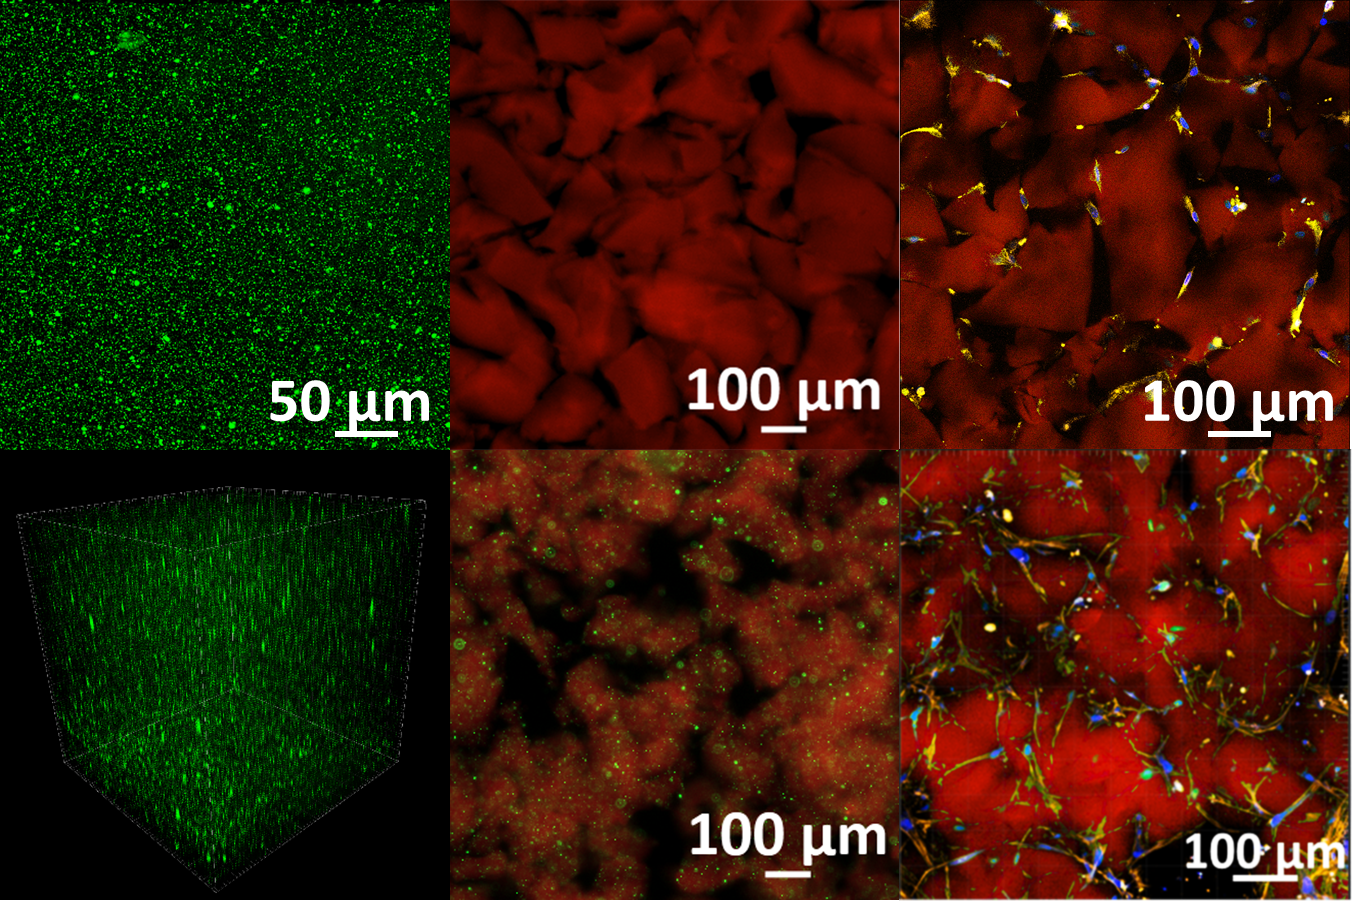 Stable particles present in the hydrogel material. Images provided by Dr. Tatiana Segura.